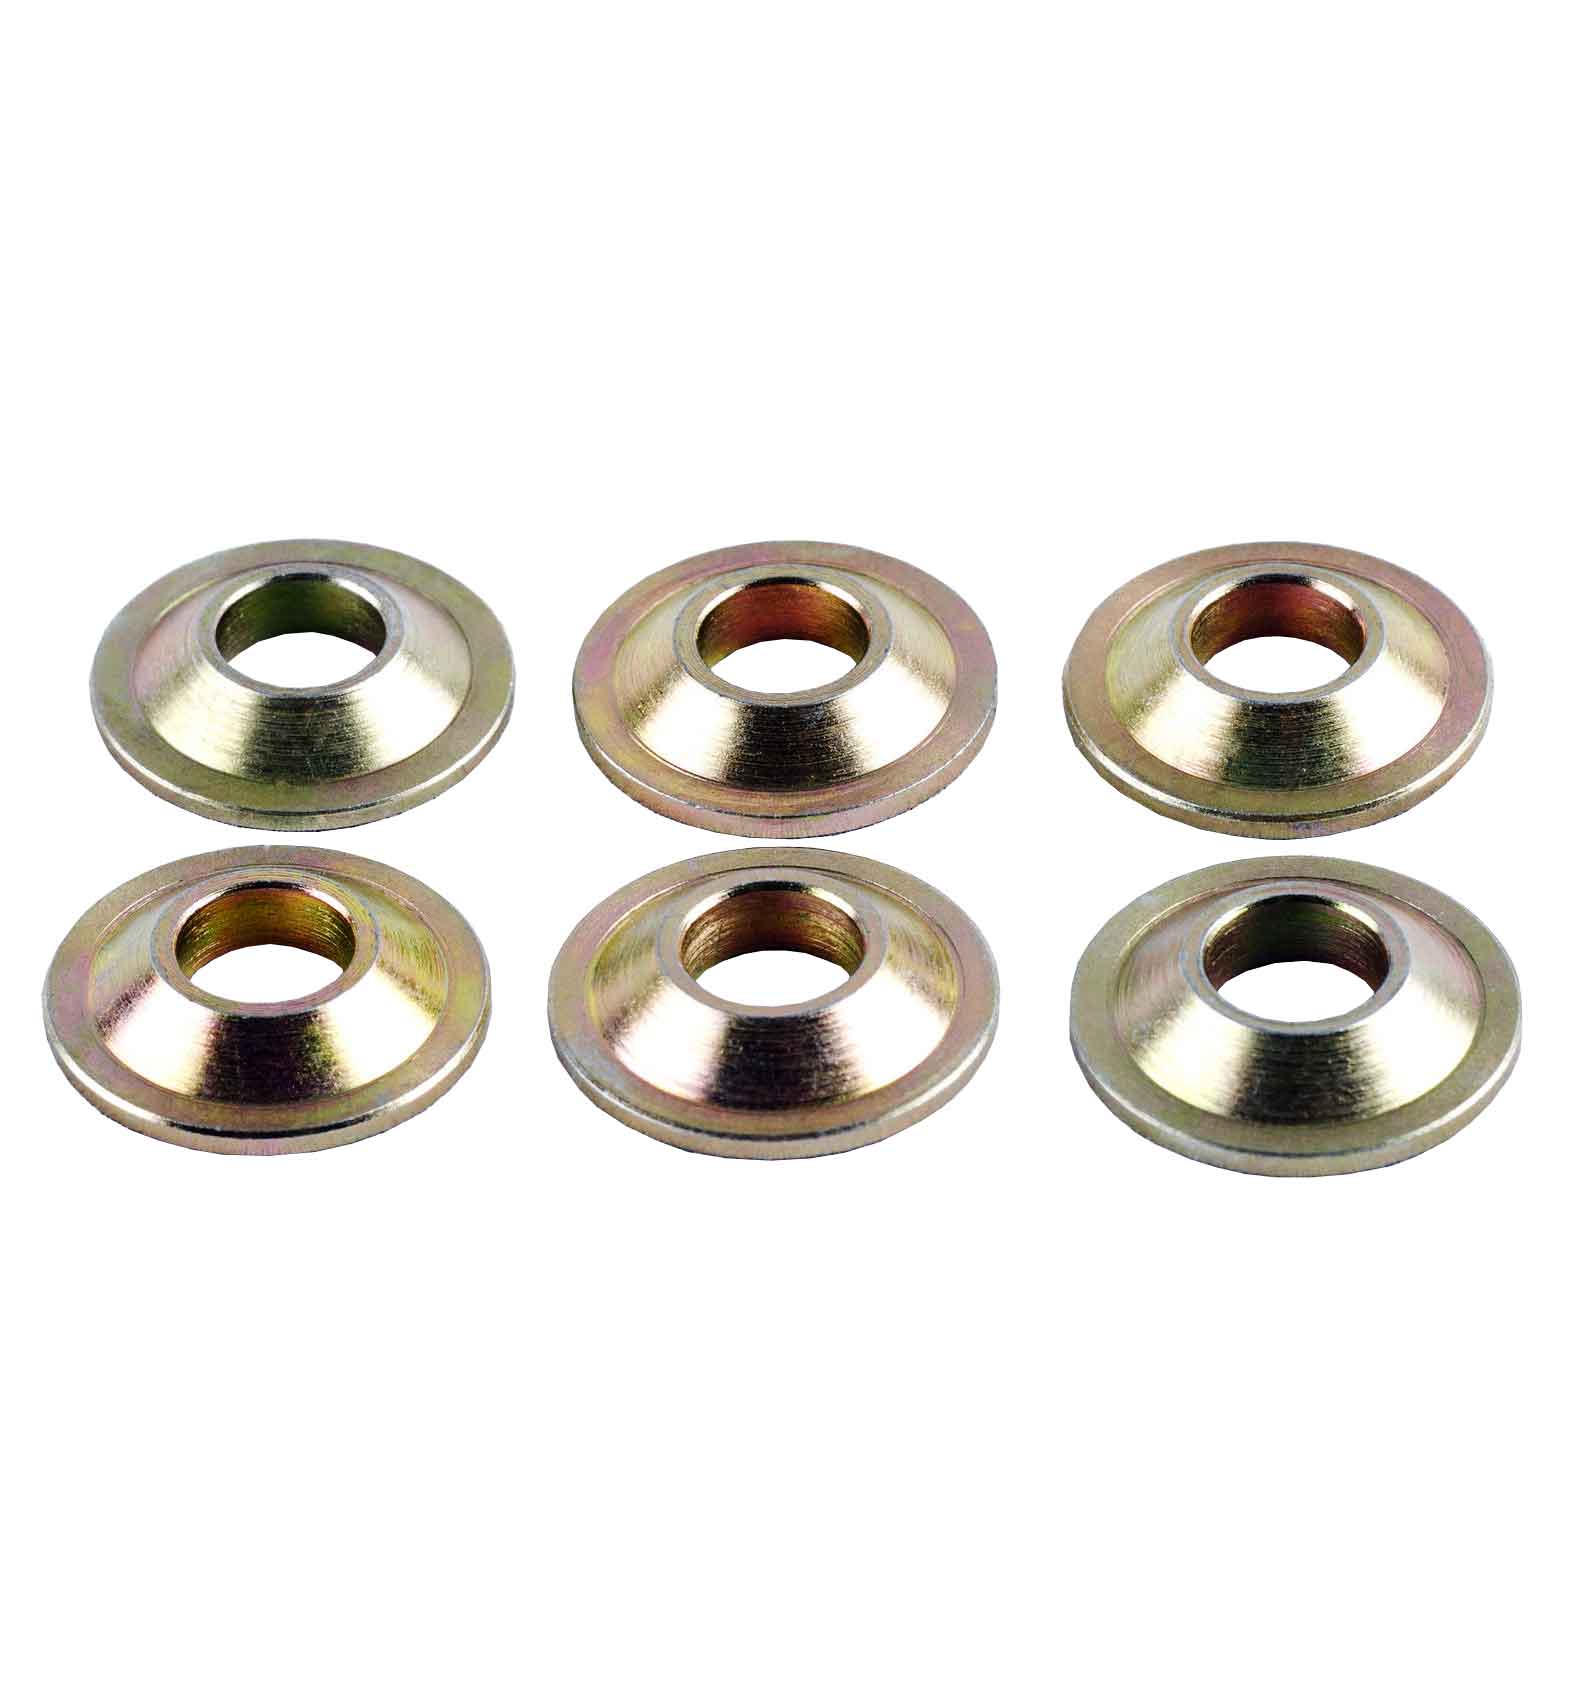 3/8" Rose Joint Misalignment Spacers (Pack of 6)